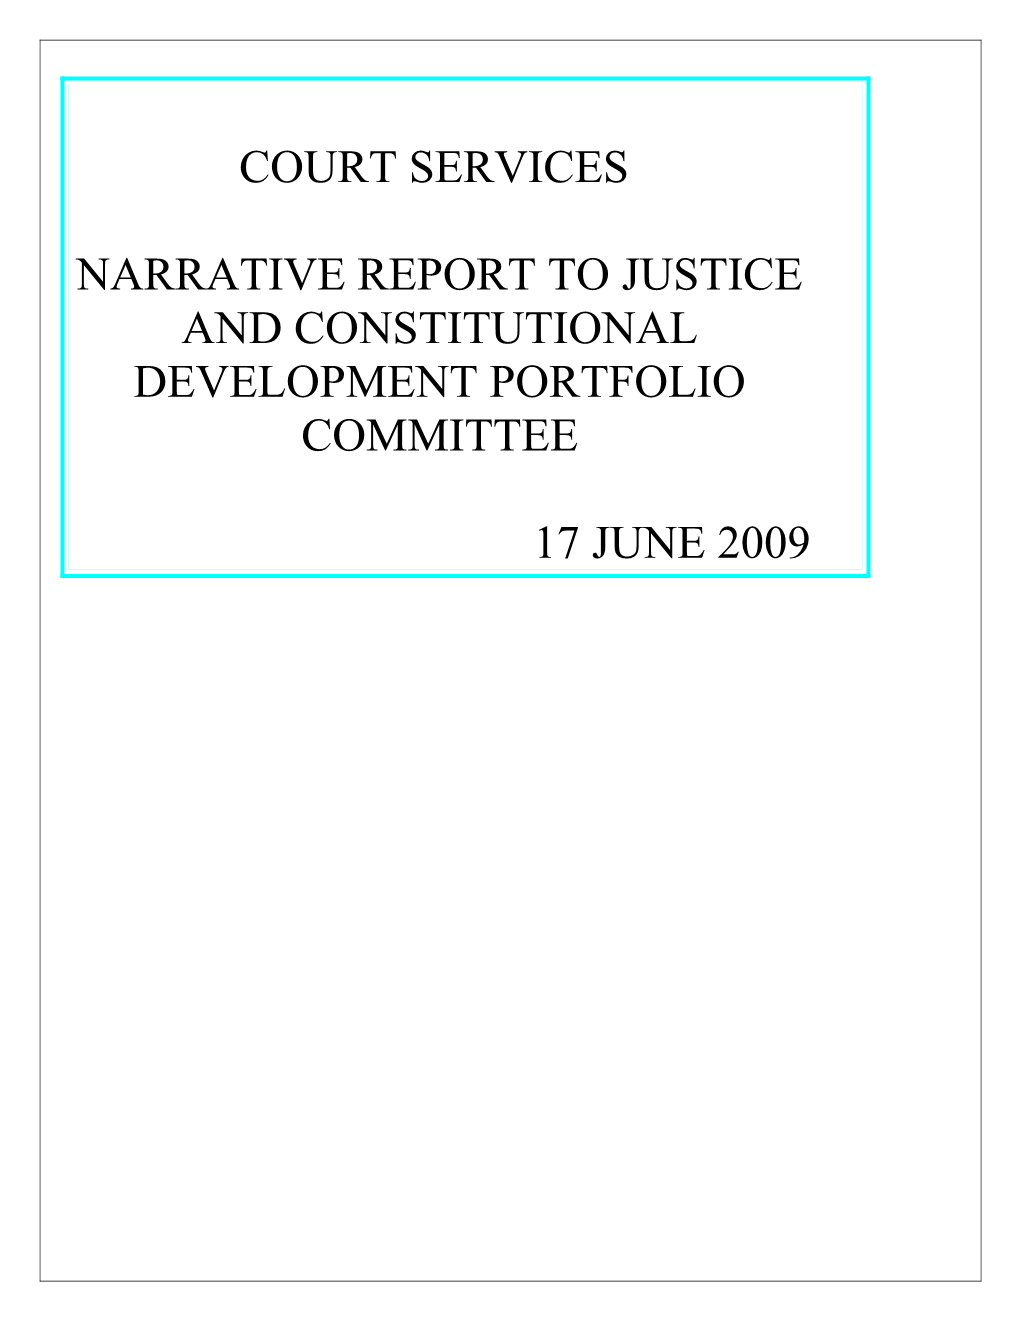 Court Services Narrative Report to Justice and Constitutional Development Portfolio Committee